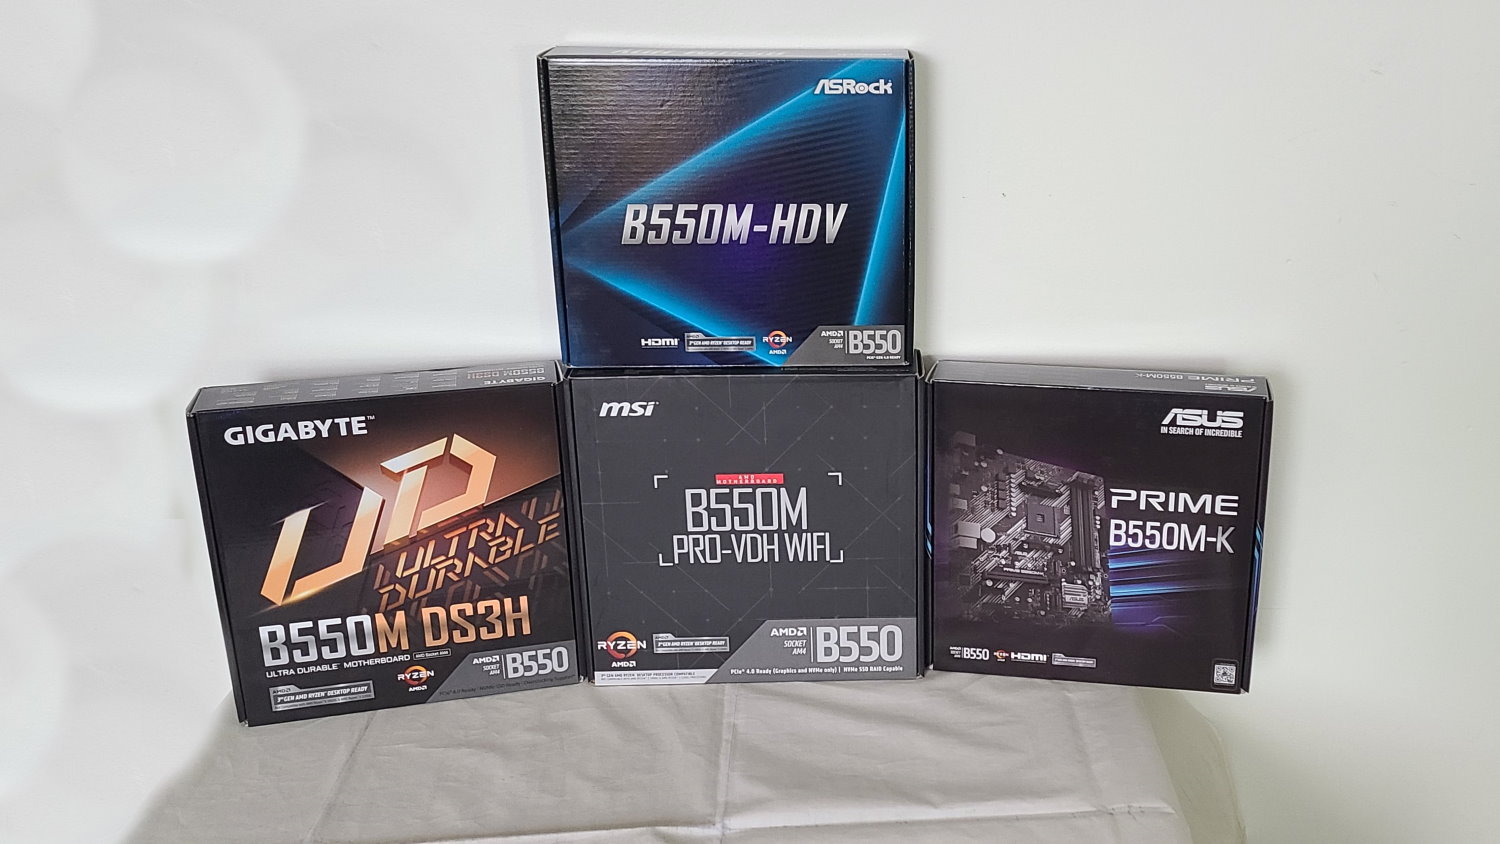 GIGABYTE B550M DS3H - The AMD B550 Motherboard Overview: ASUS